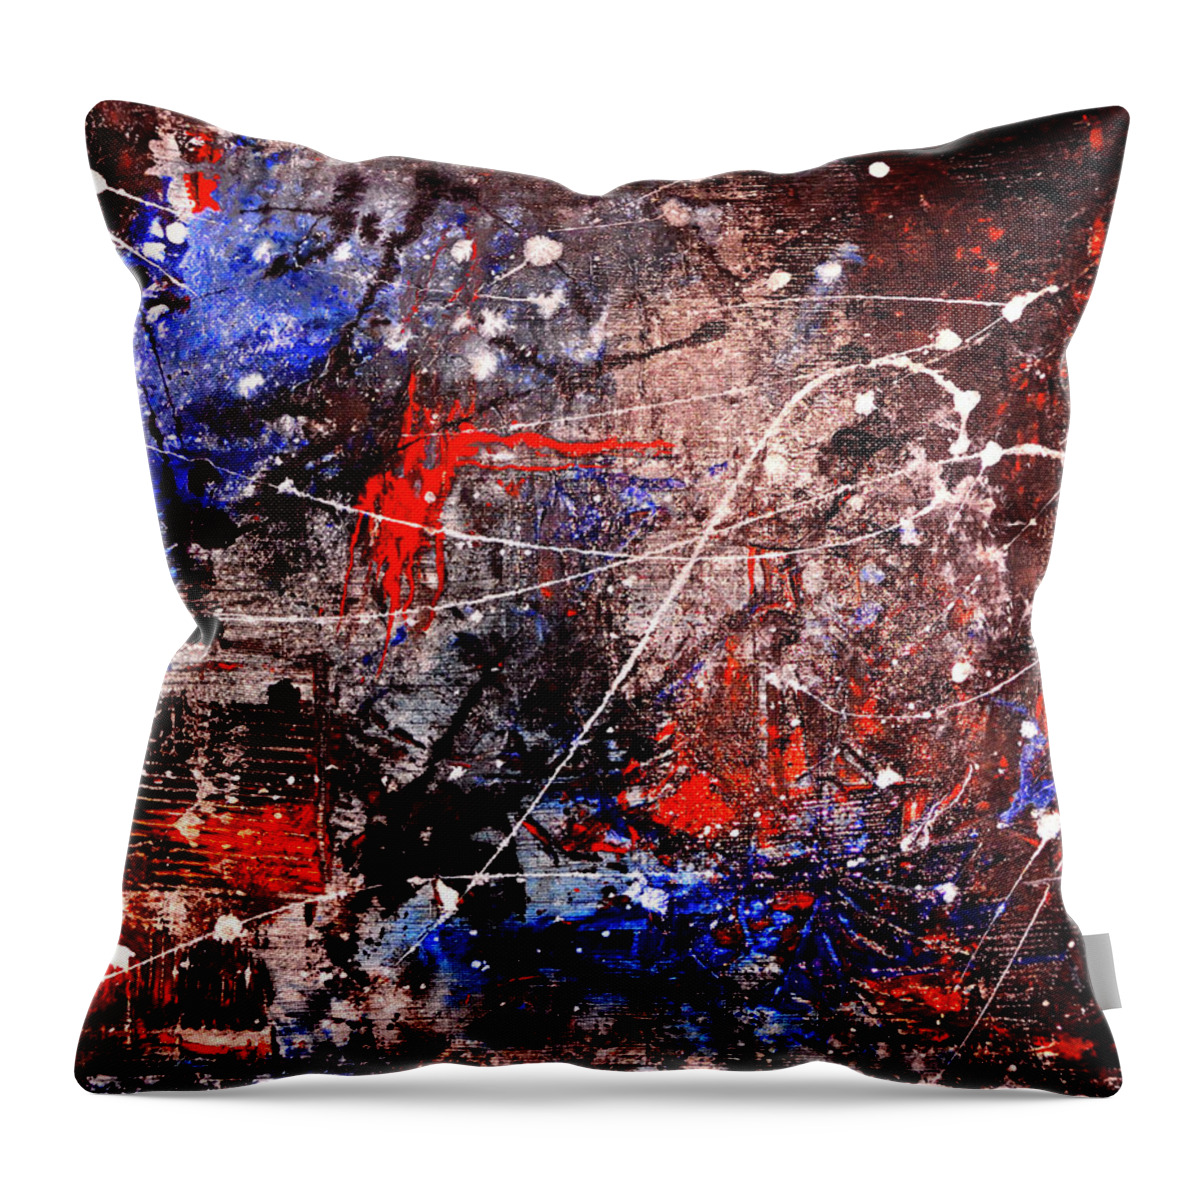 Acrylic Painting Throw Pillow featuring the painting Celebration 5 by Richard Ortolano